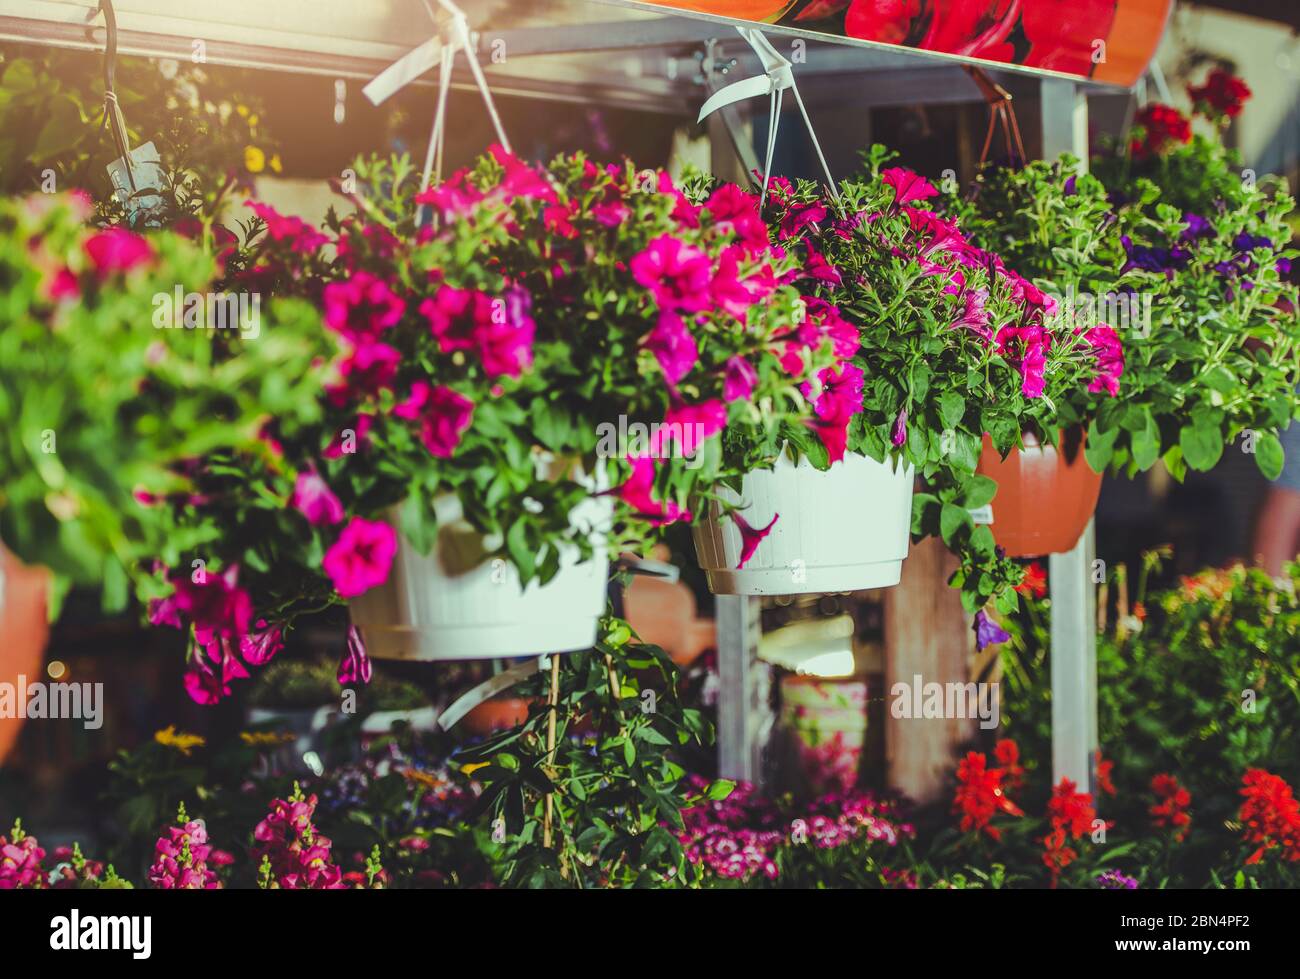 Close Up Of Bright Colored Flowers In Pots Hanging In Rows In Greenhouse Of Home Improvement Store. Stock Photo